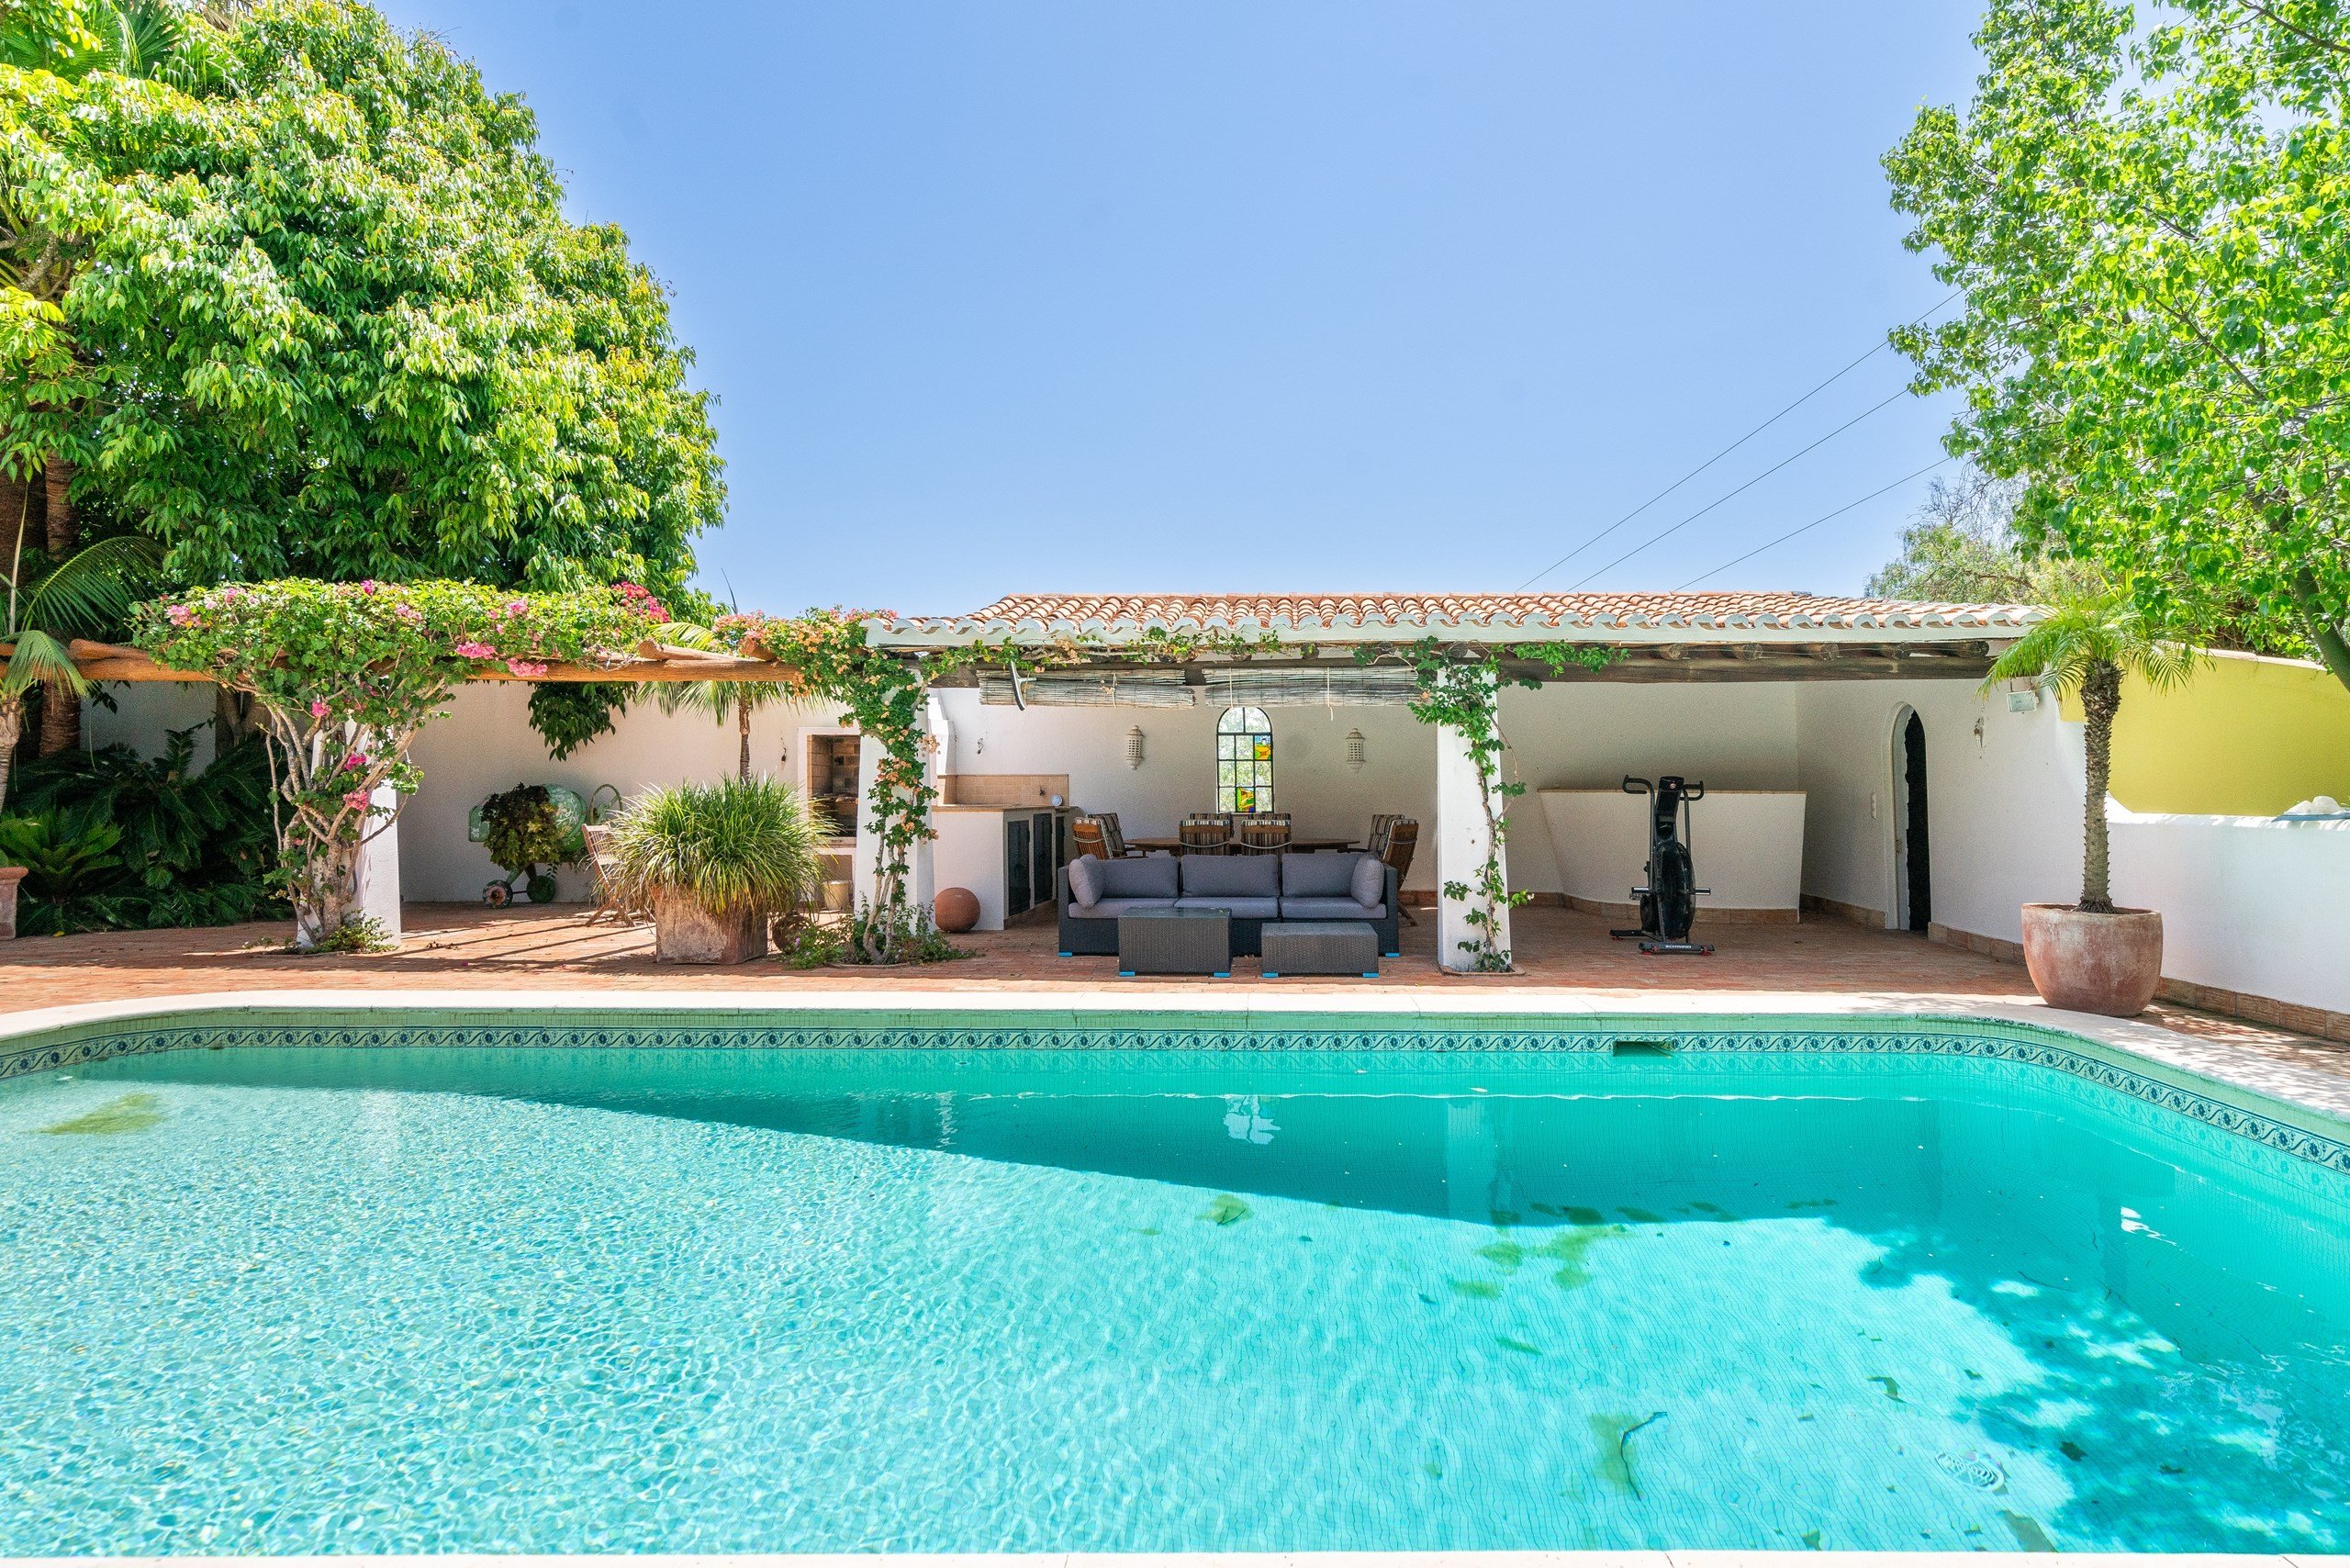 Luxury 7 Bedroom Retreat Villa For Sale in the Algarve, Portugal, with ove3r 35,200 Sqr Mtrs of Land